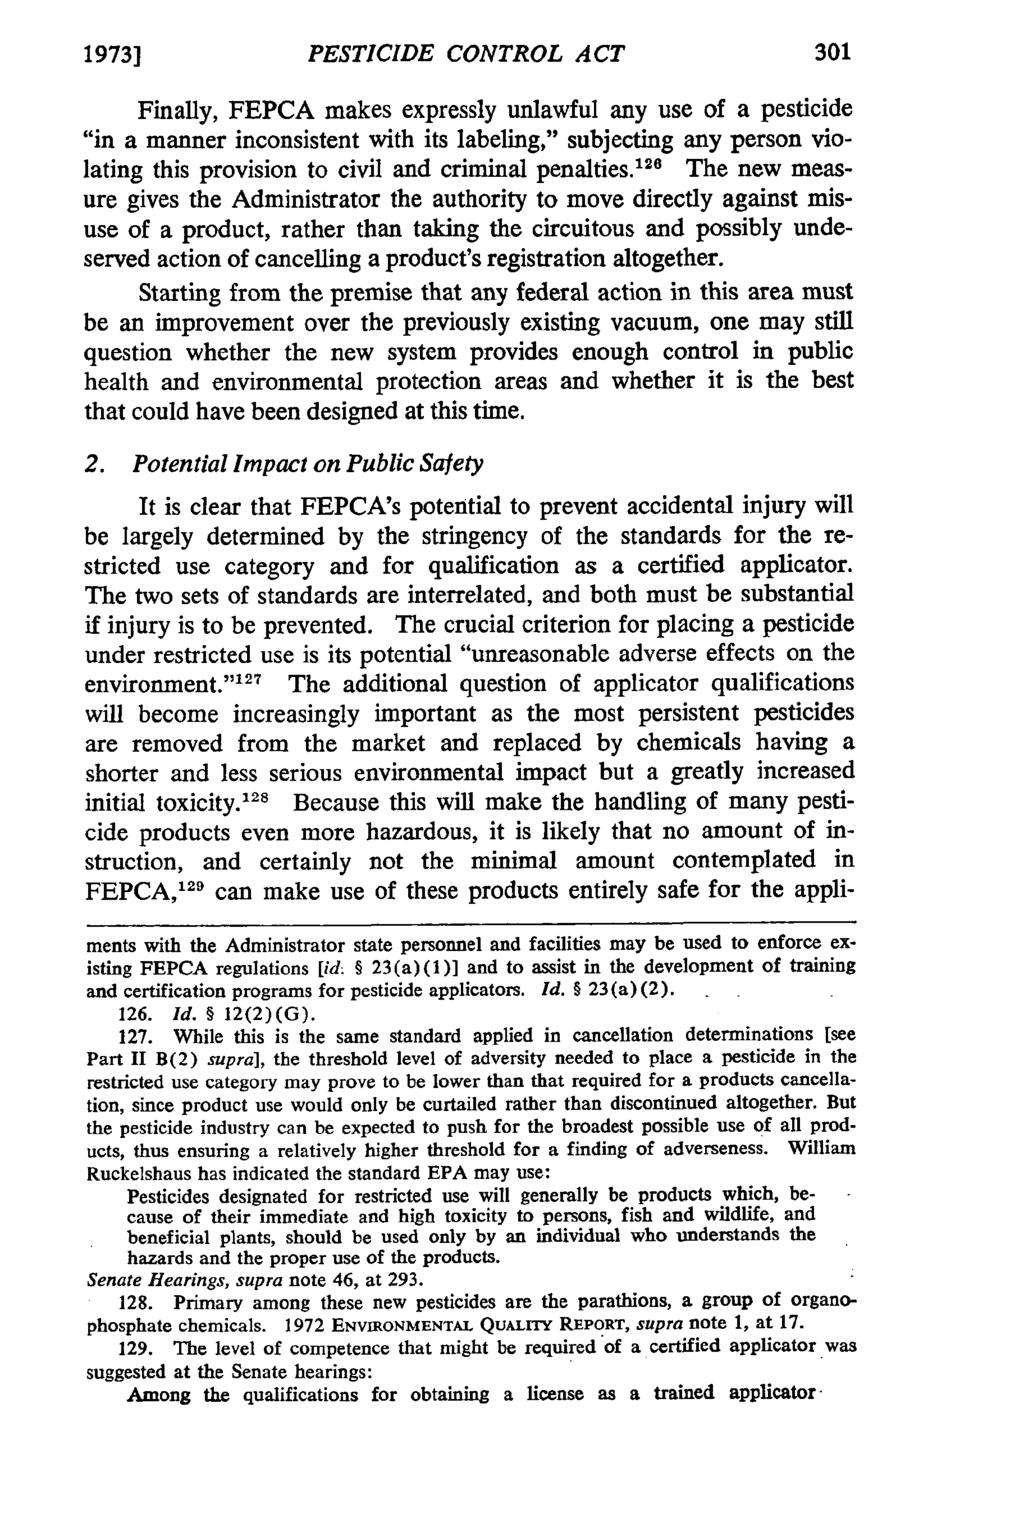 1973] PESTICIDE CONTROL ACT Finally, FEPCA makes expressly unlawful any use of a pesticide "in a manner inconsistent with its labeling," subjecting any person violating this provision to civil and